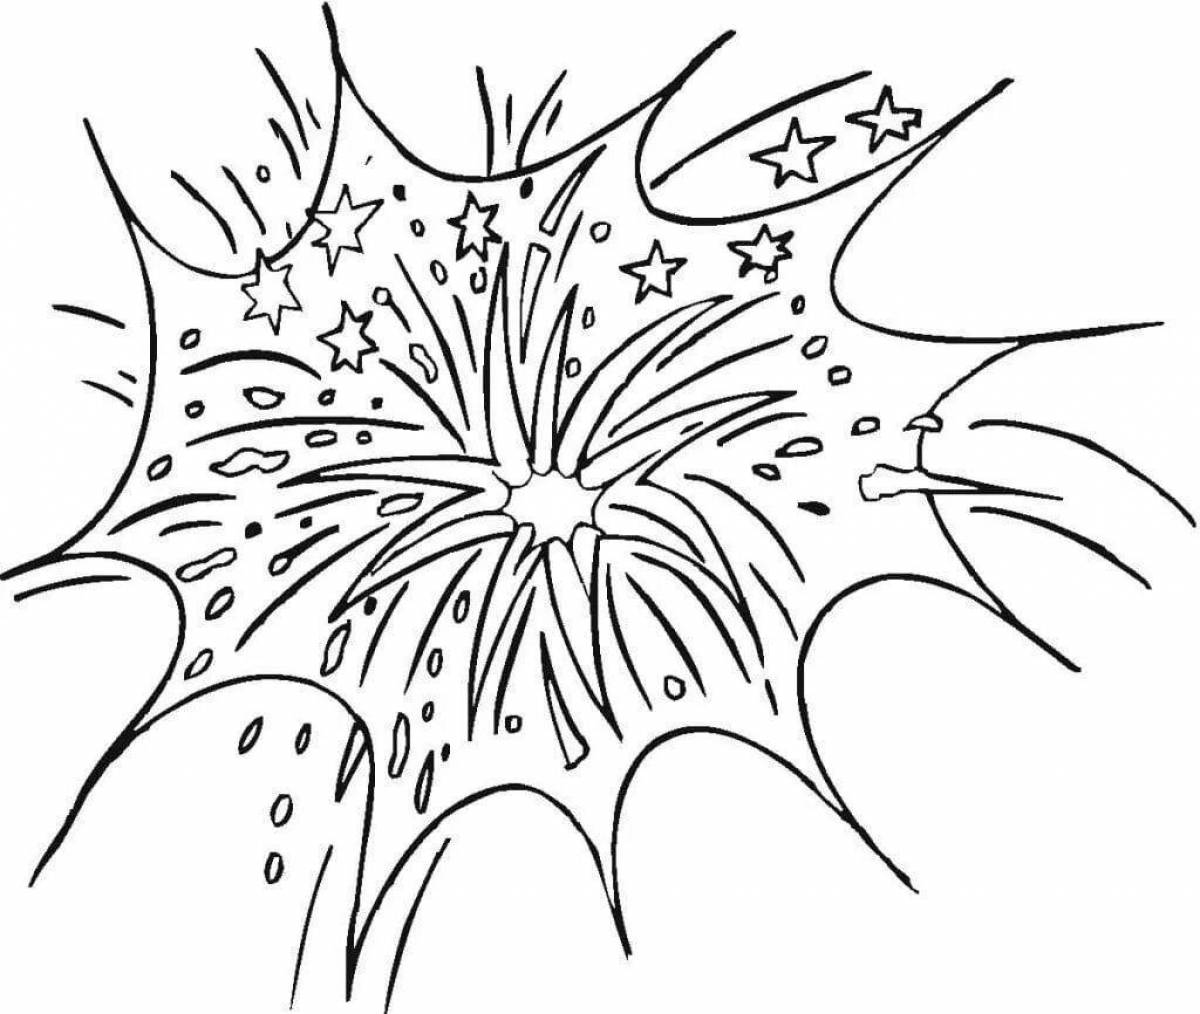 Funny fireworks coloring book for kids